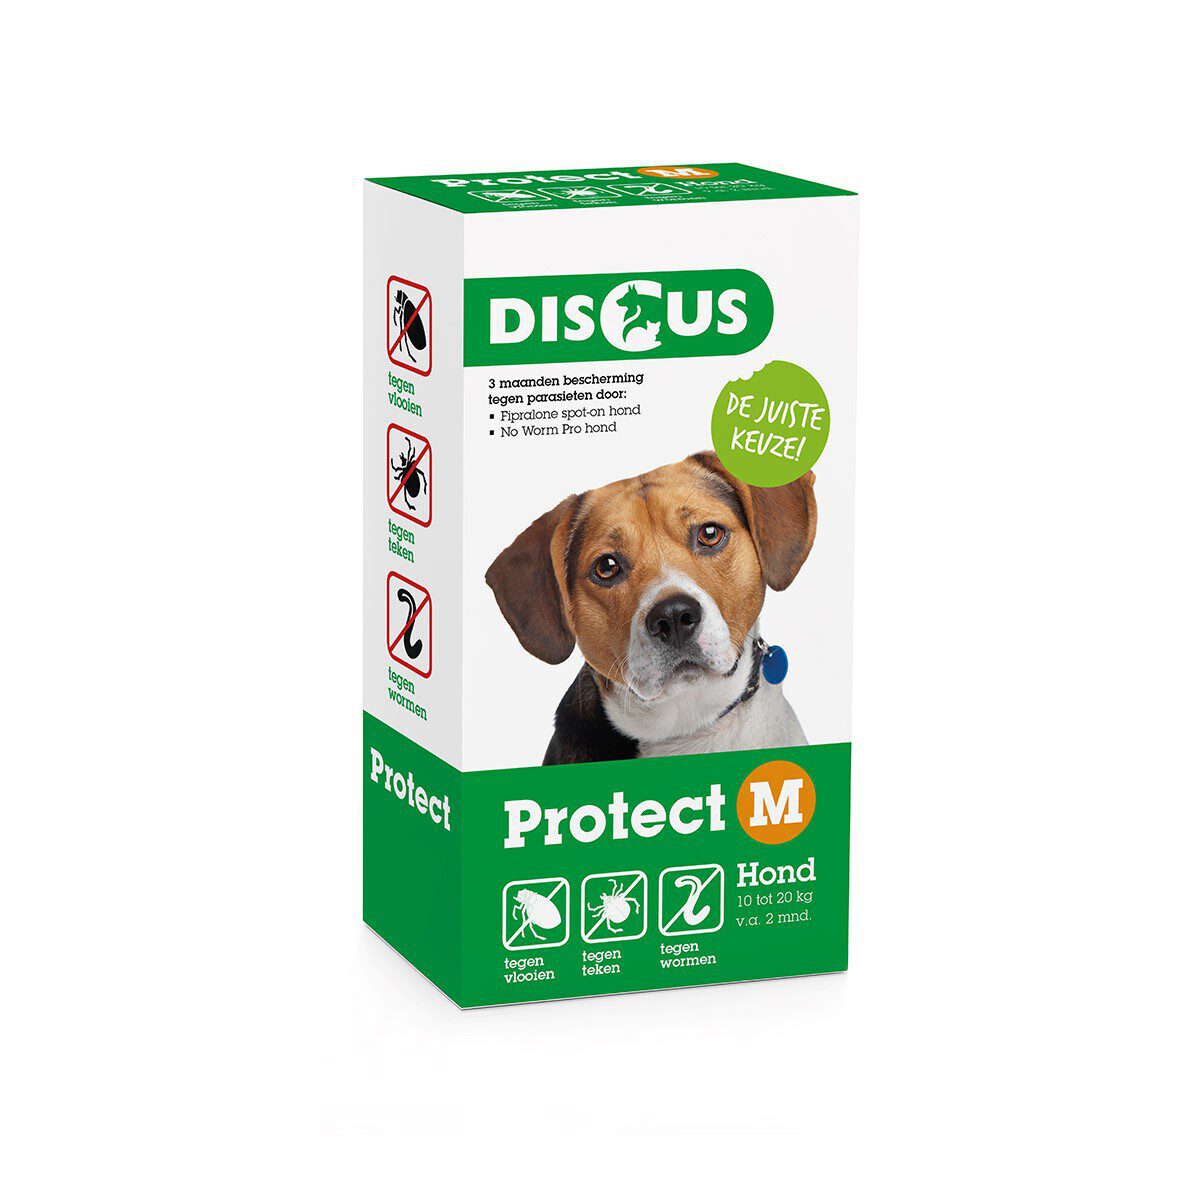 discus-protect-m-hond.jpg